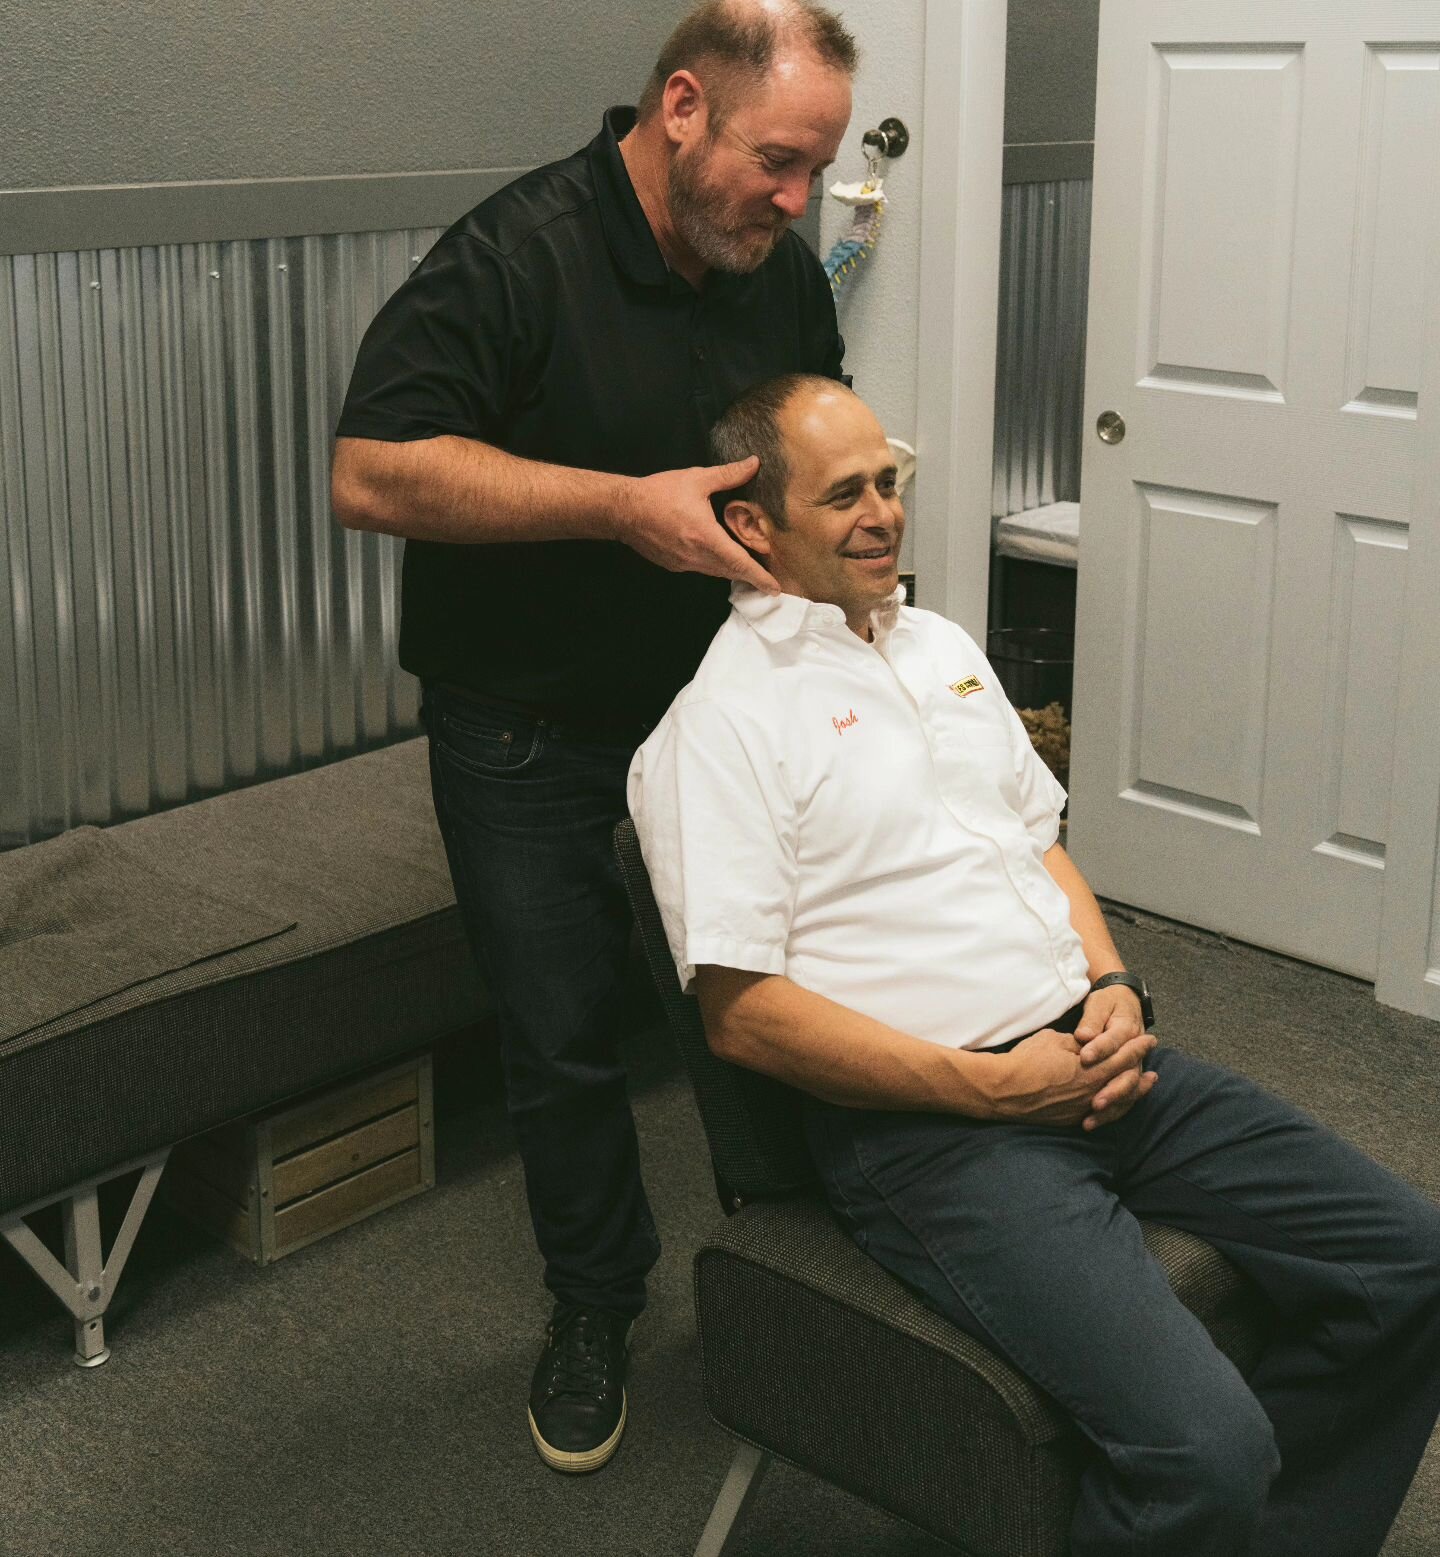 Do you know what Dr. Bryan is doing with your neck adjustments?
He will apply localized force to specific parts of the neck in an effort to restore proper alignment of the neck and vertebrae, relieving pressure and tension.